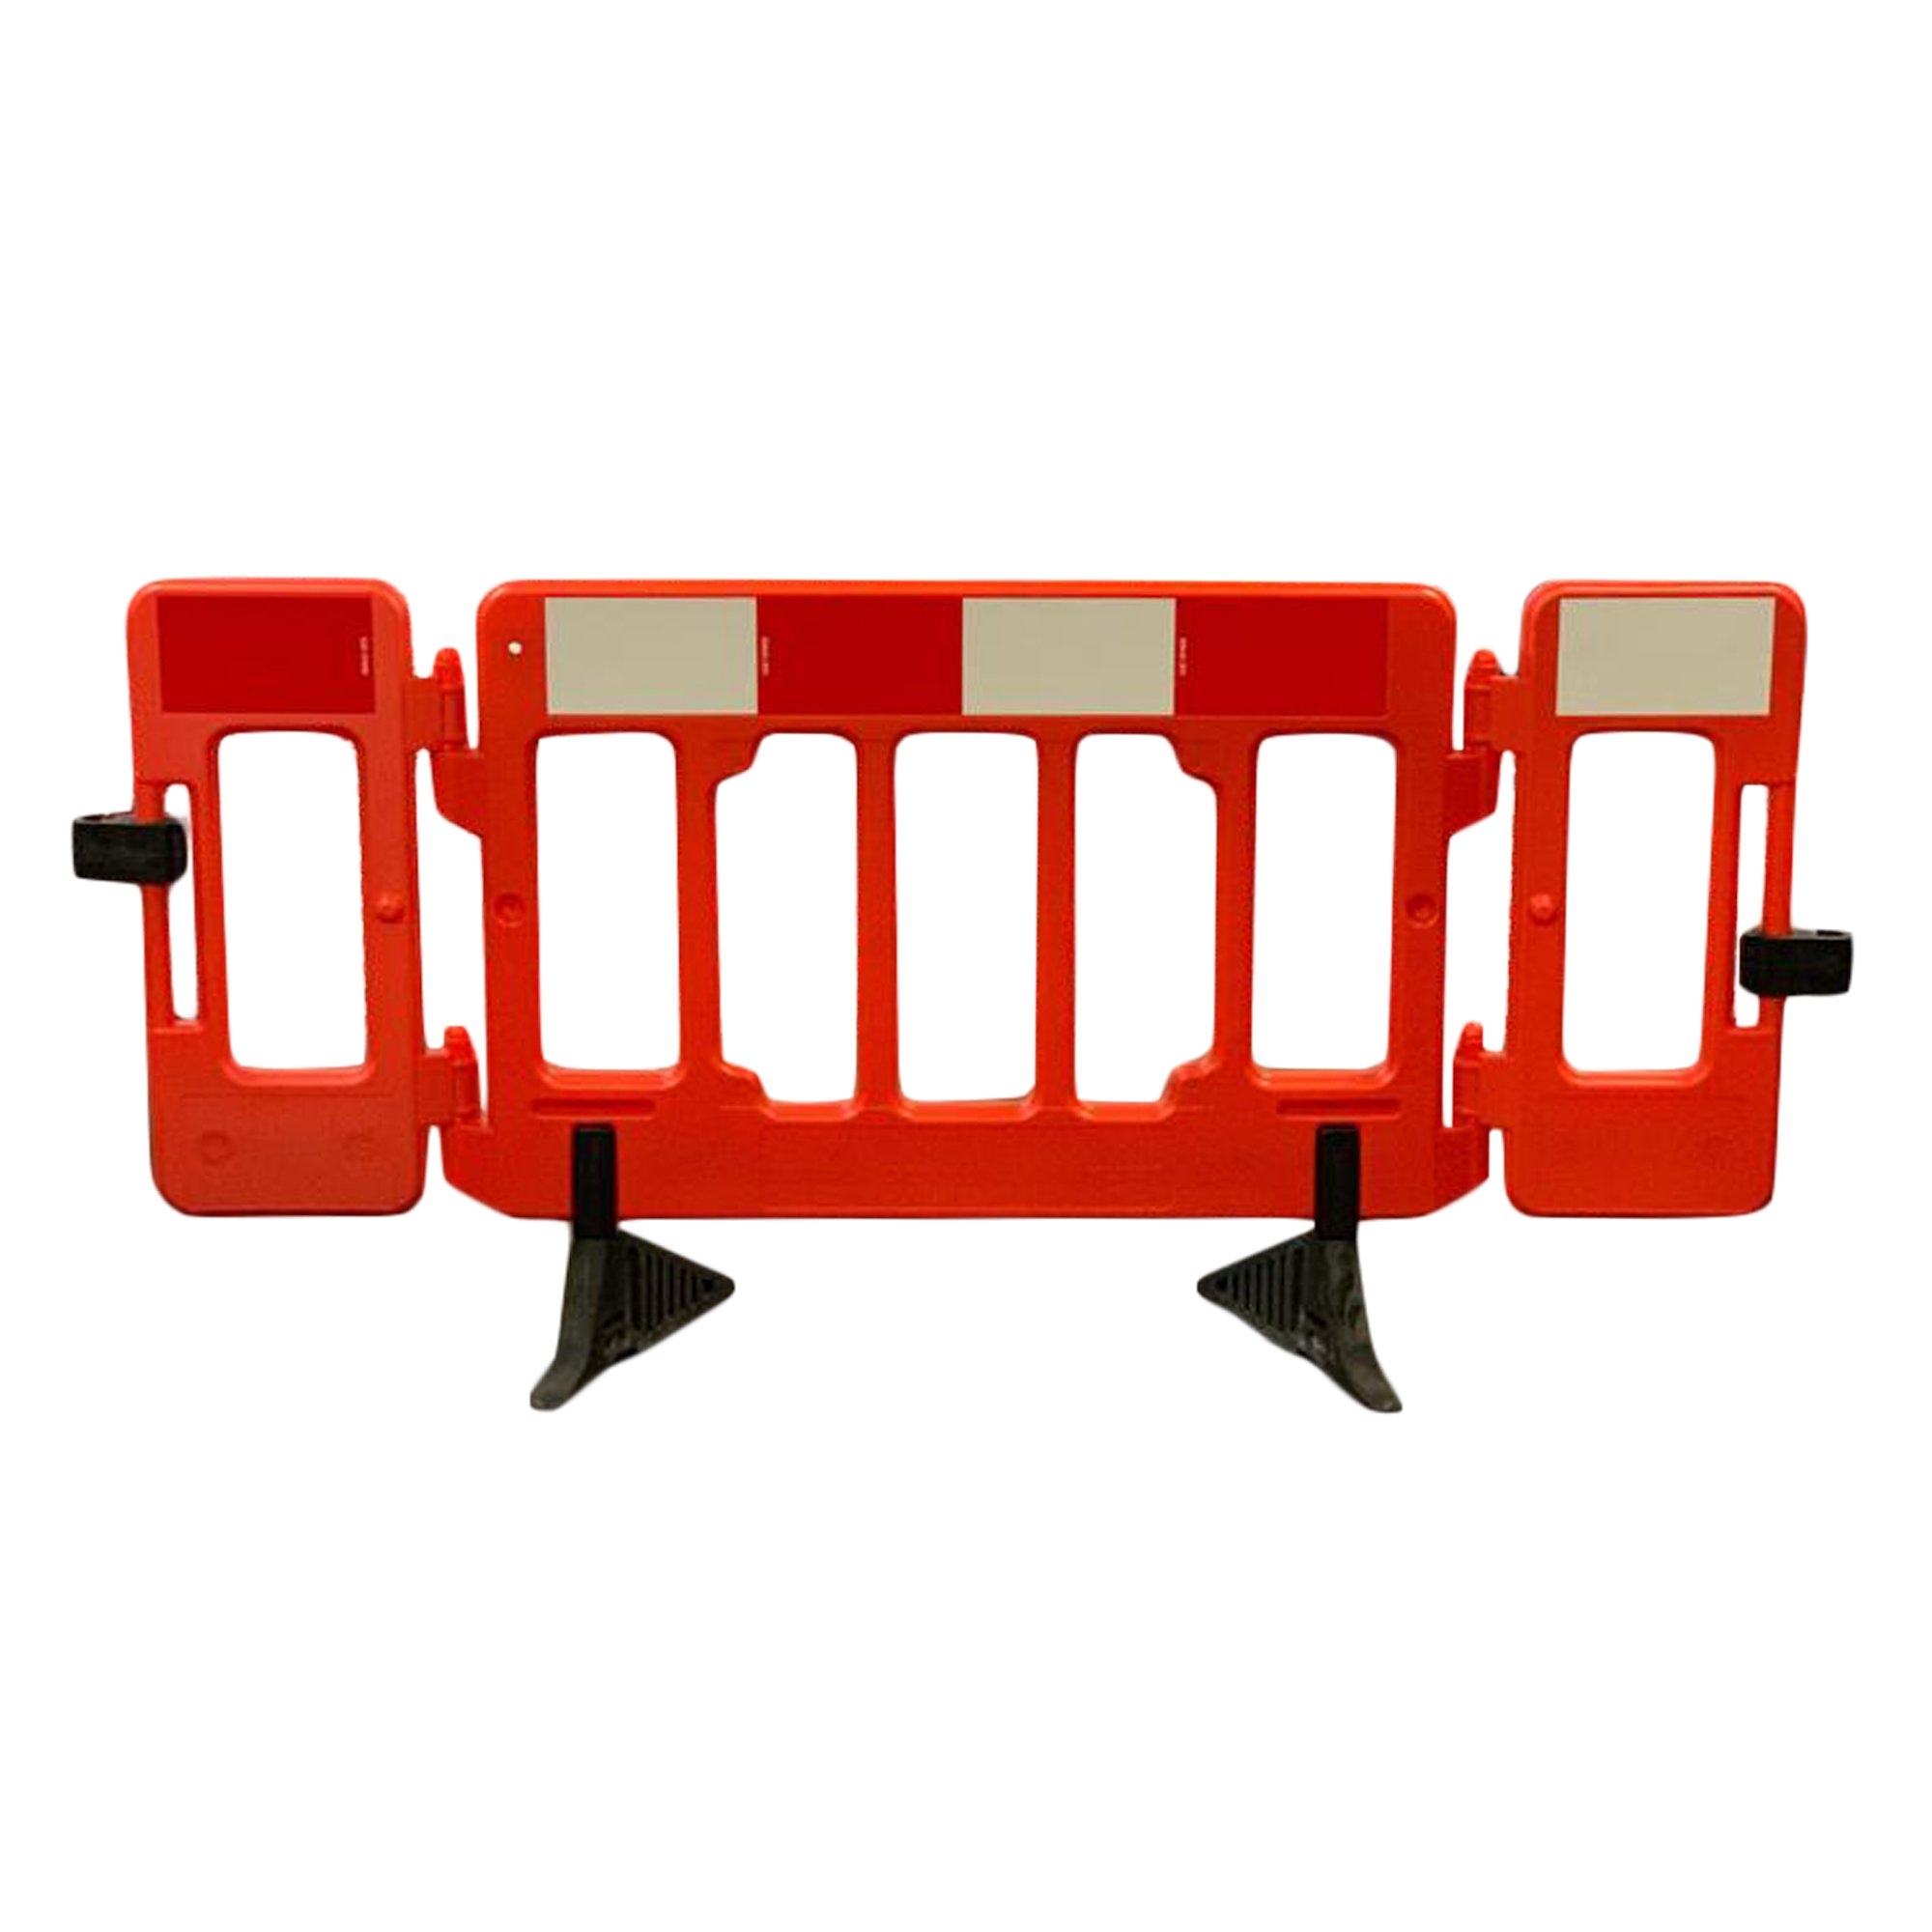 2M Olympic Barrier Anti-Trip Red / White Colour Street Solutions UK